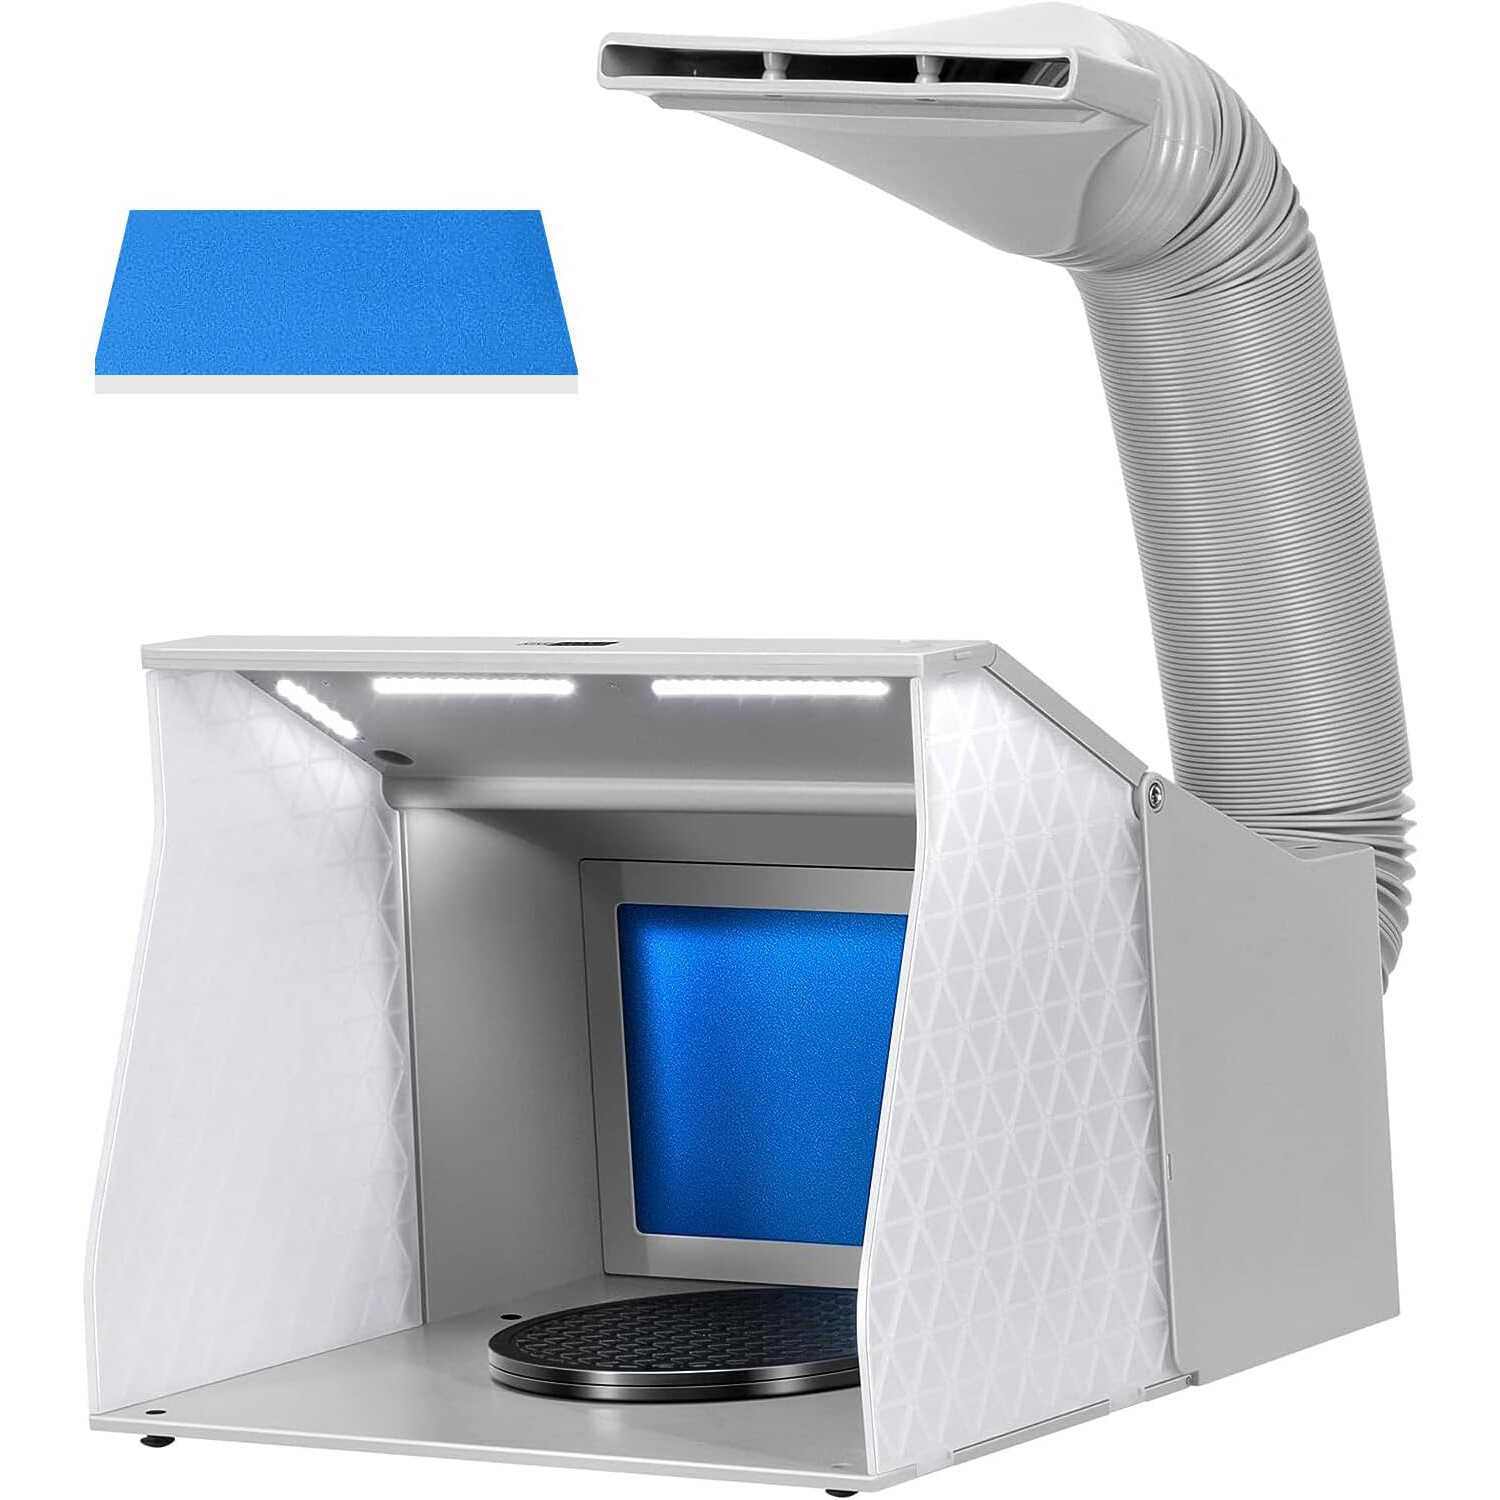 VIVOHOME Dual Fans Airbrush Paint Spray Booth with 4 LED Lights Turn Table and Filter Hose, Grey + Blue